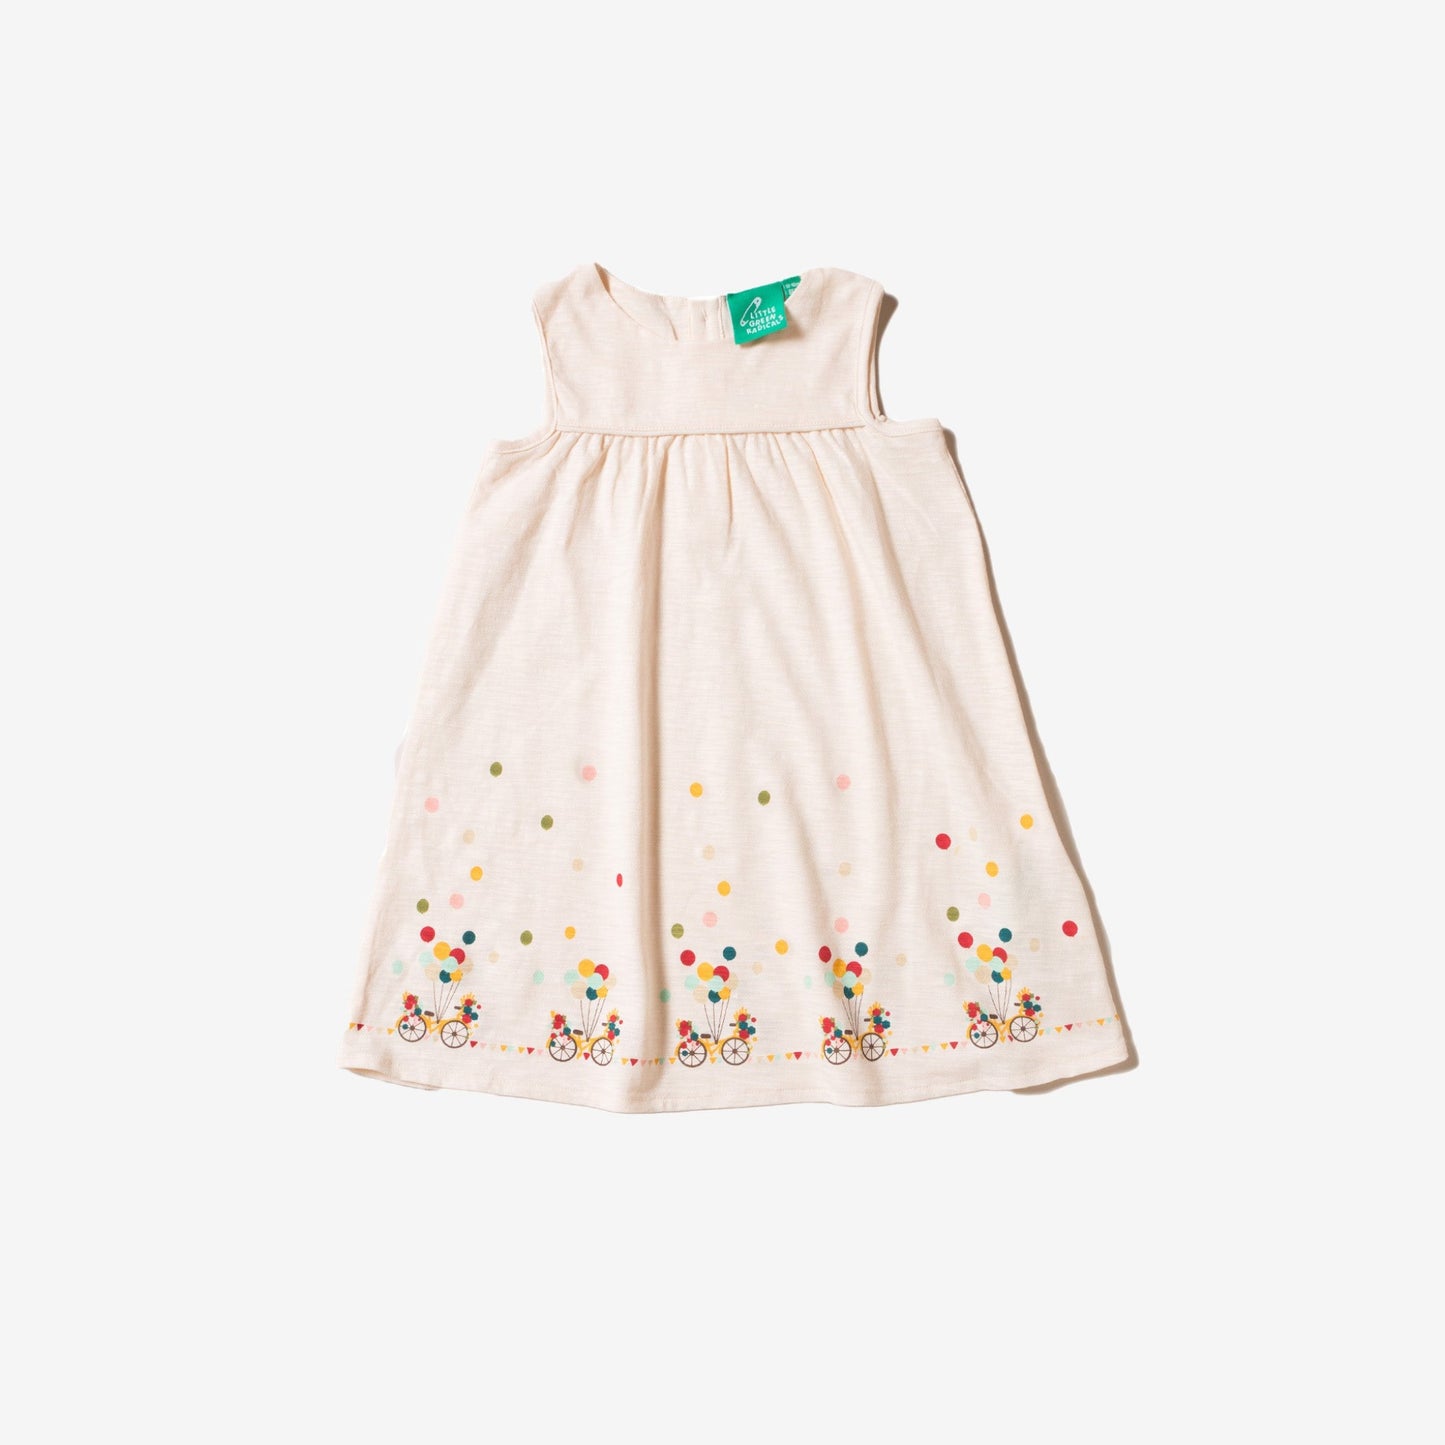 Flying high story time dress